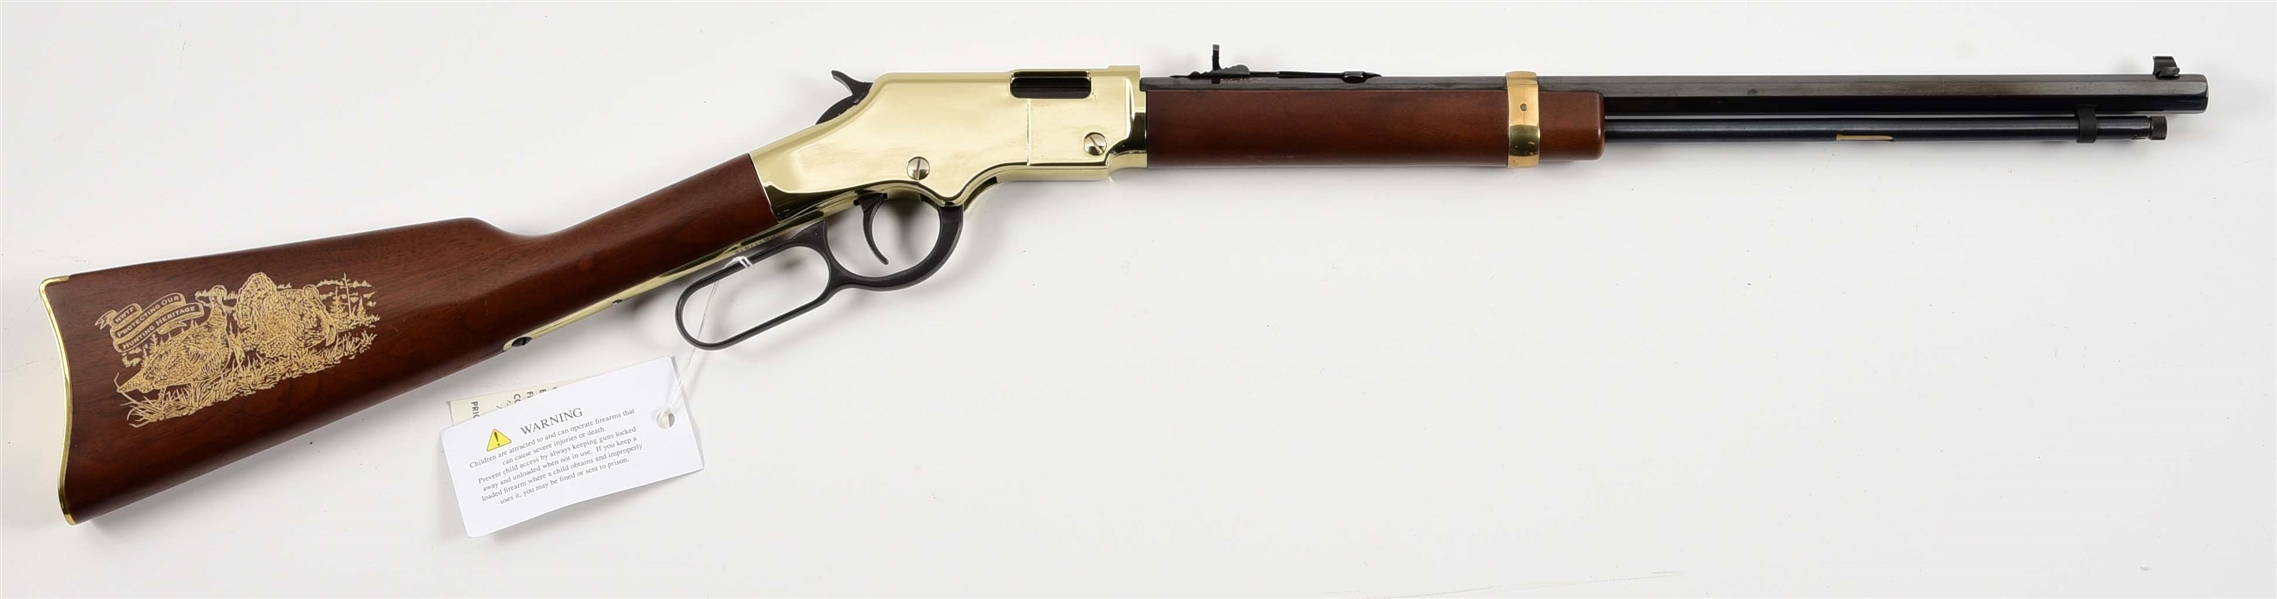 (M) HENRY GOLDEN BOY NWTF COMMEMORATIVE LEVER ACTION RIFLE IN .22 LR.